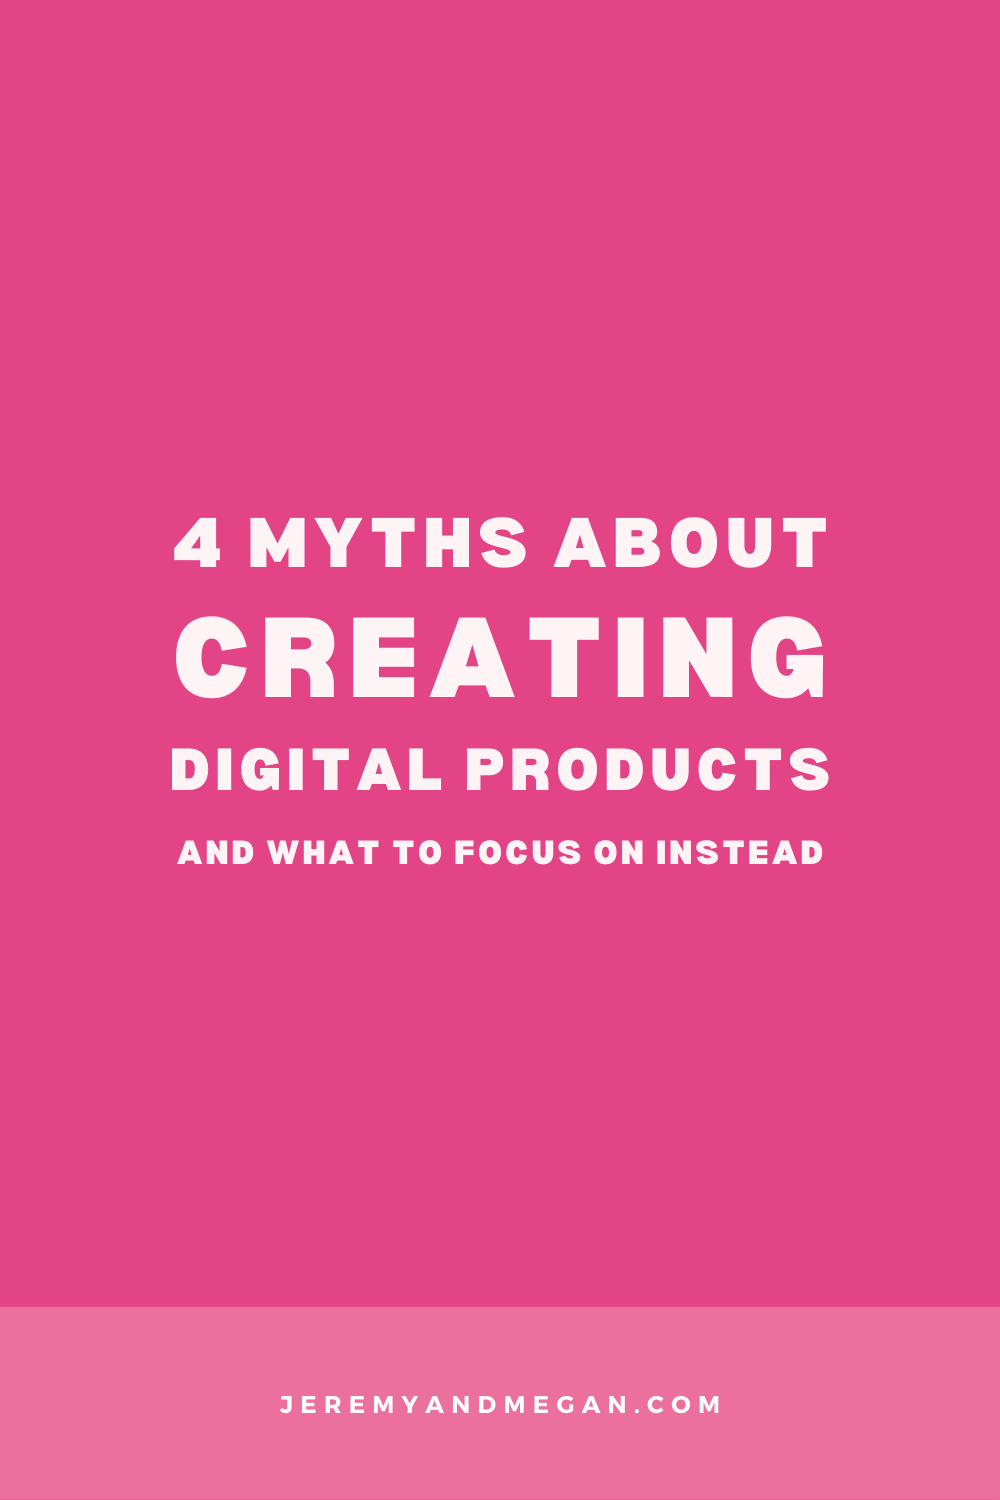 4 Myths about creating digital products and what to focus on instead to start earning passive profit in your business